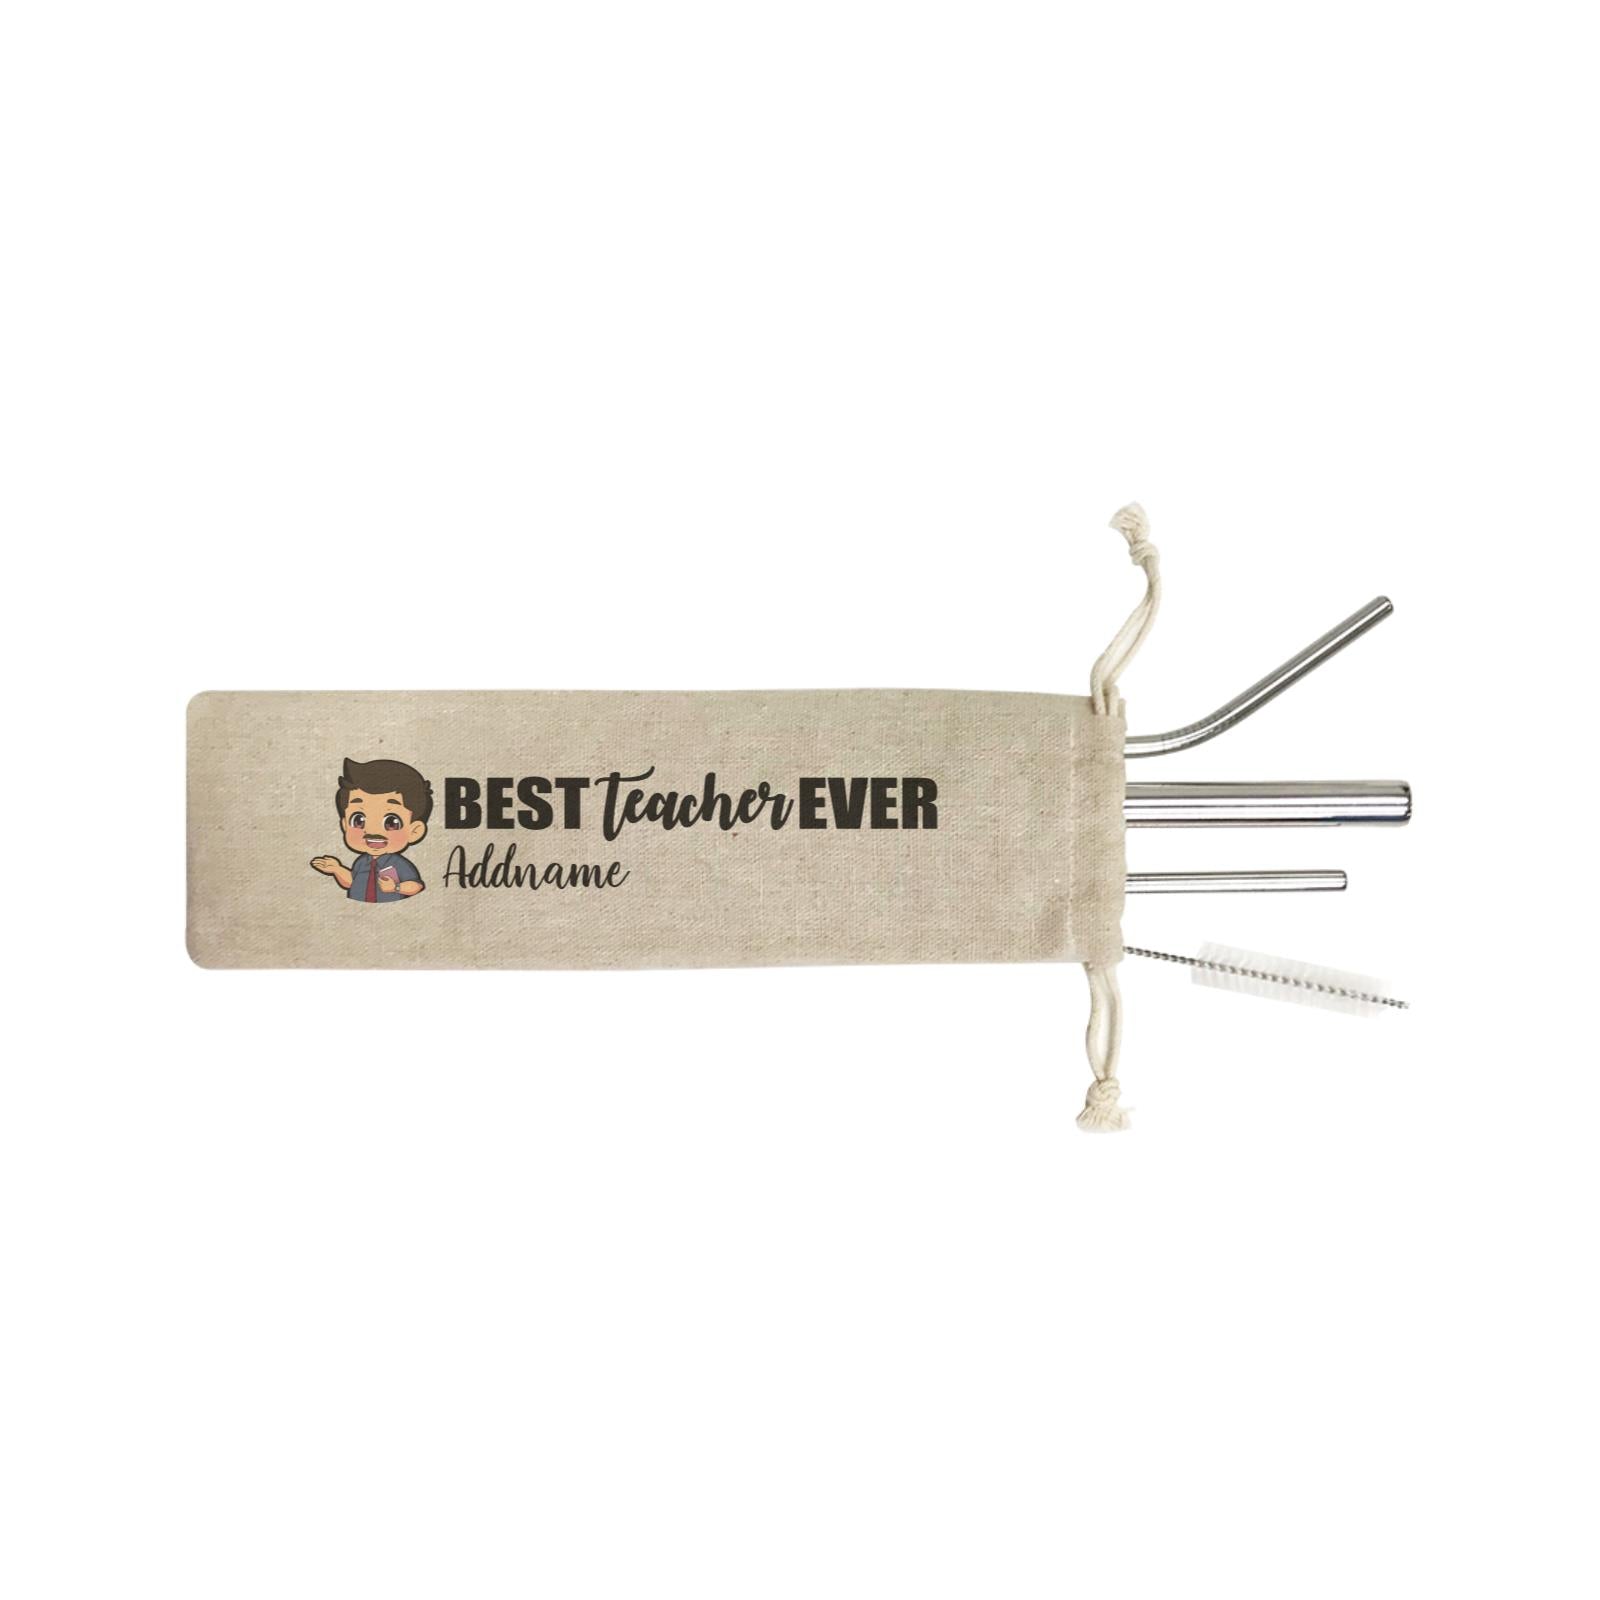 Chibi Teachers Chubby Male Best Teacher Ever Addname SB 4-In-1 Stainless Steel Straw Set in Satchel